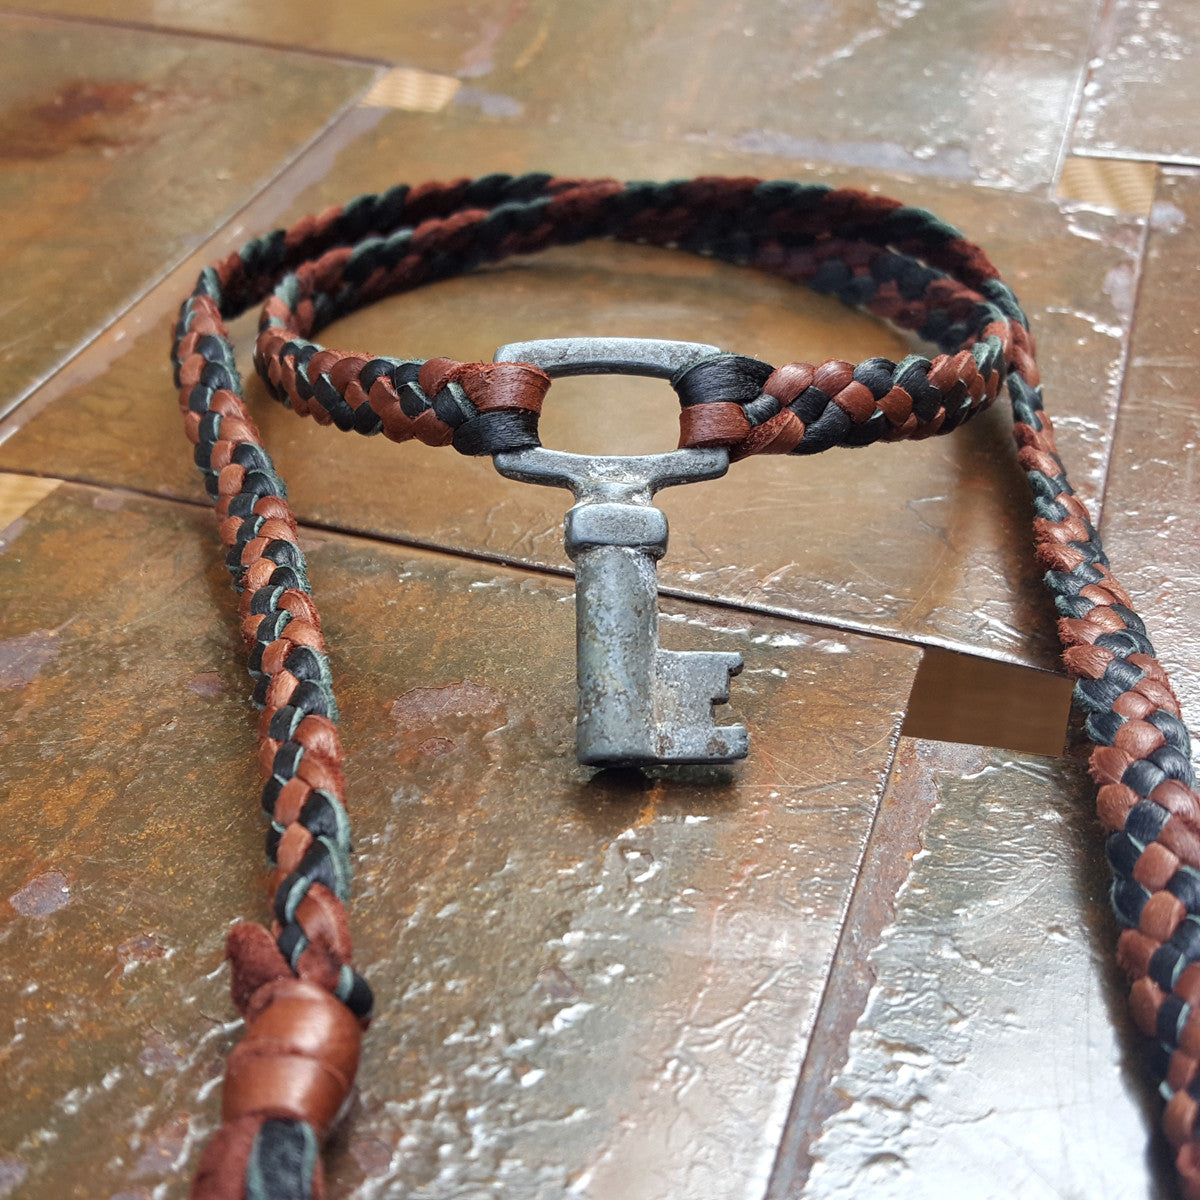  vintage french key pendant - braided leather necklace